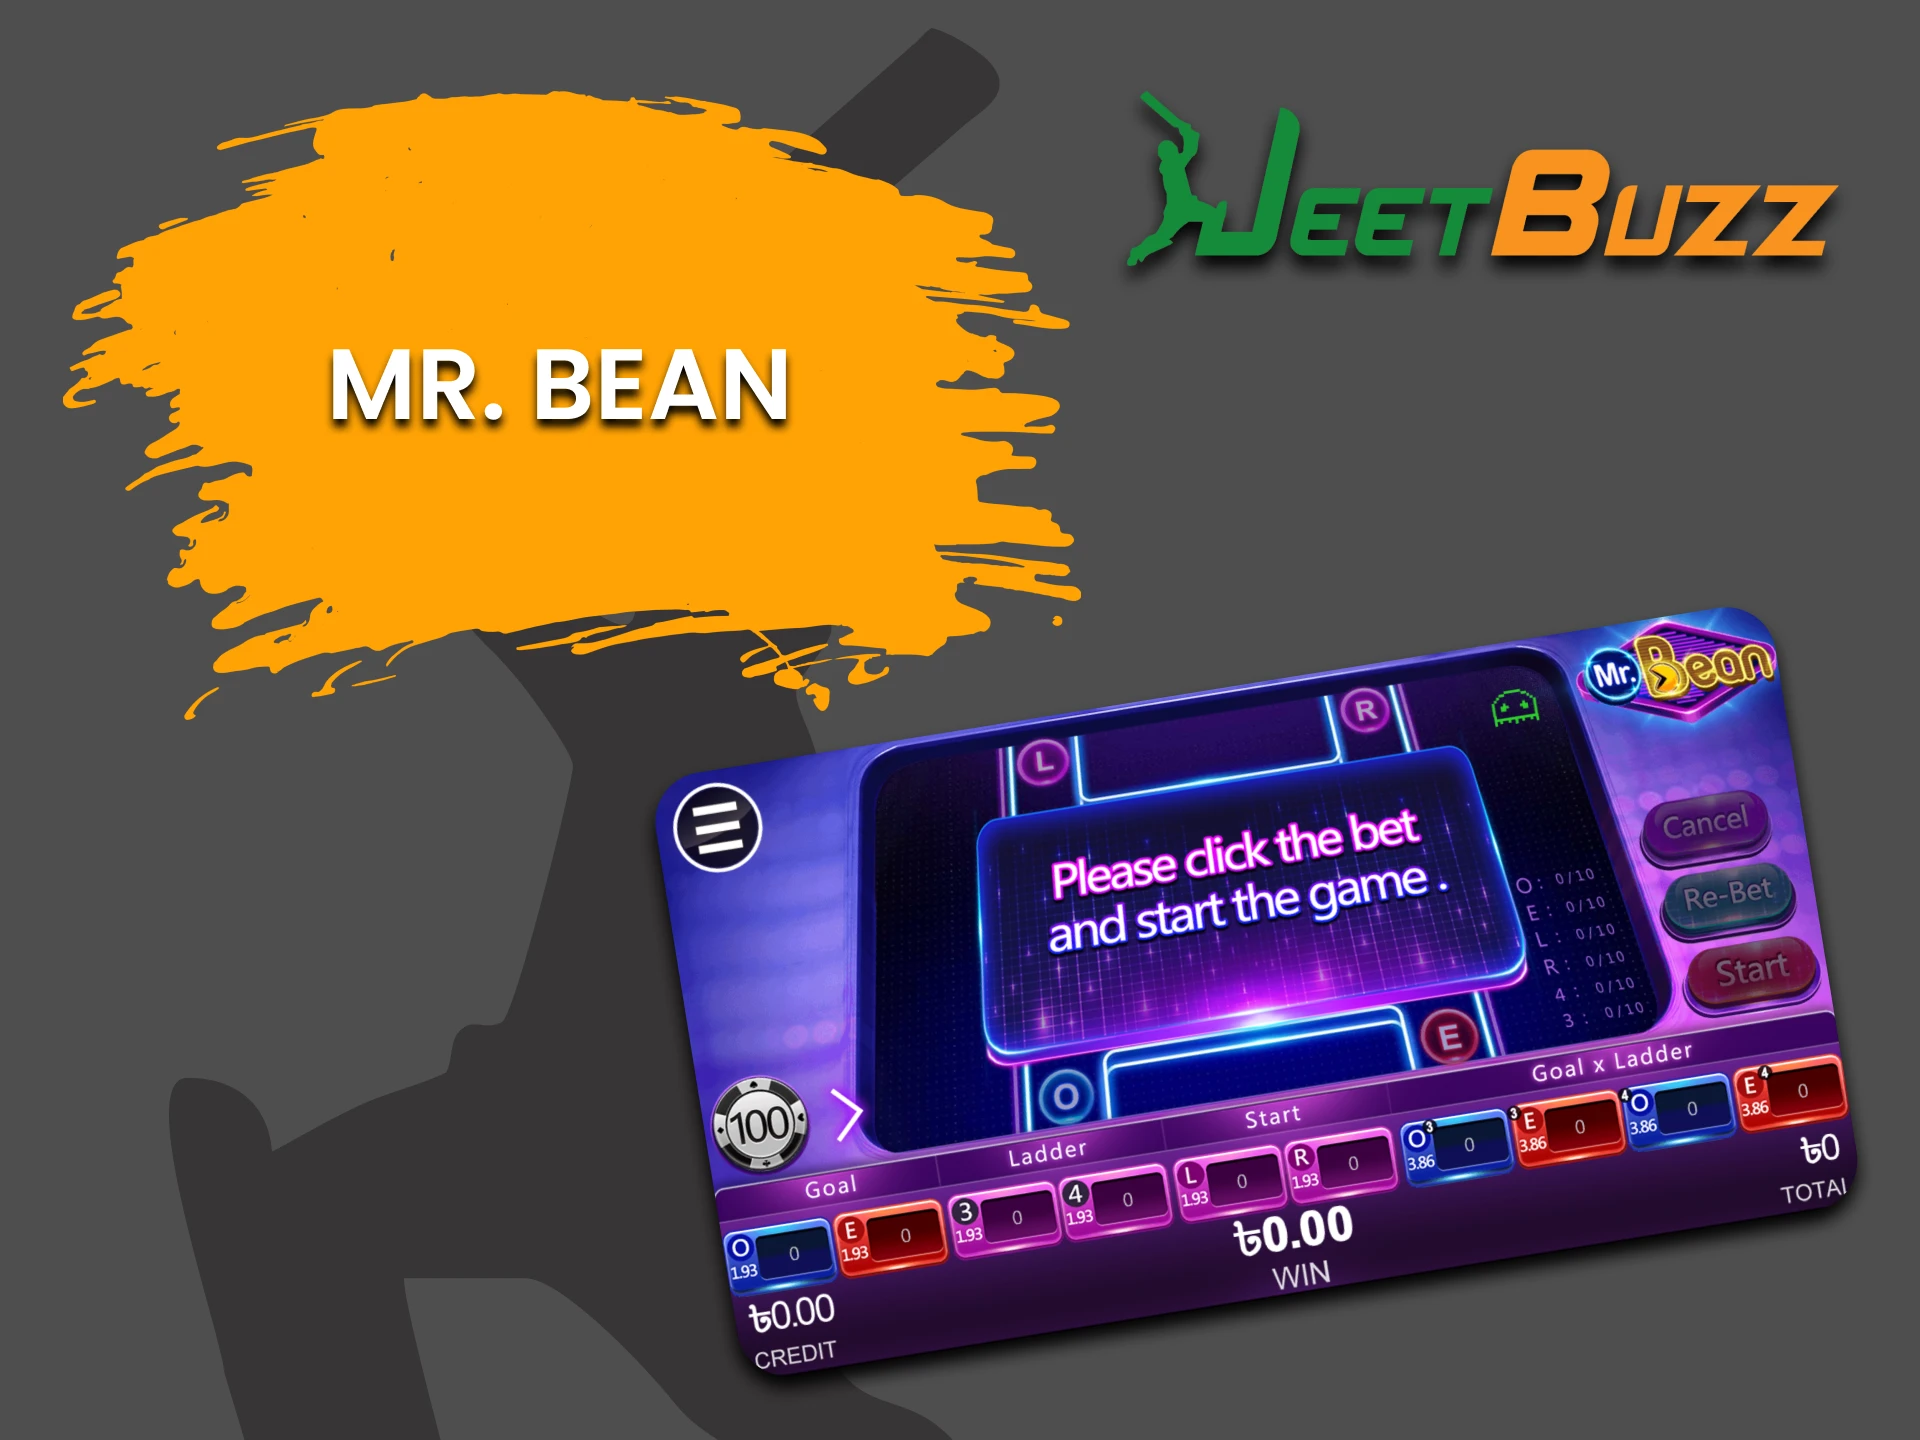 After selecting the Arcade section of JeetBuzz, try playing Mr.Bean.